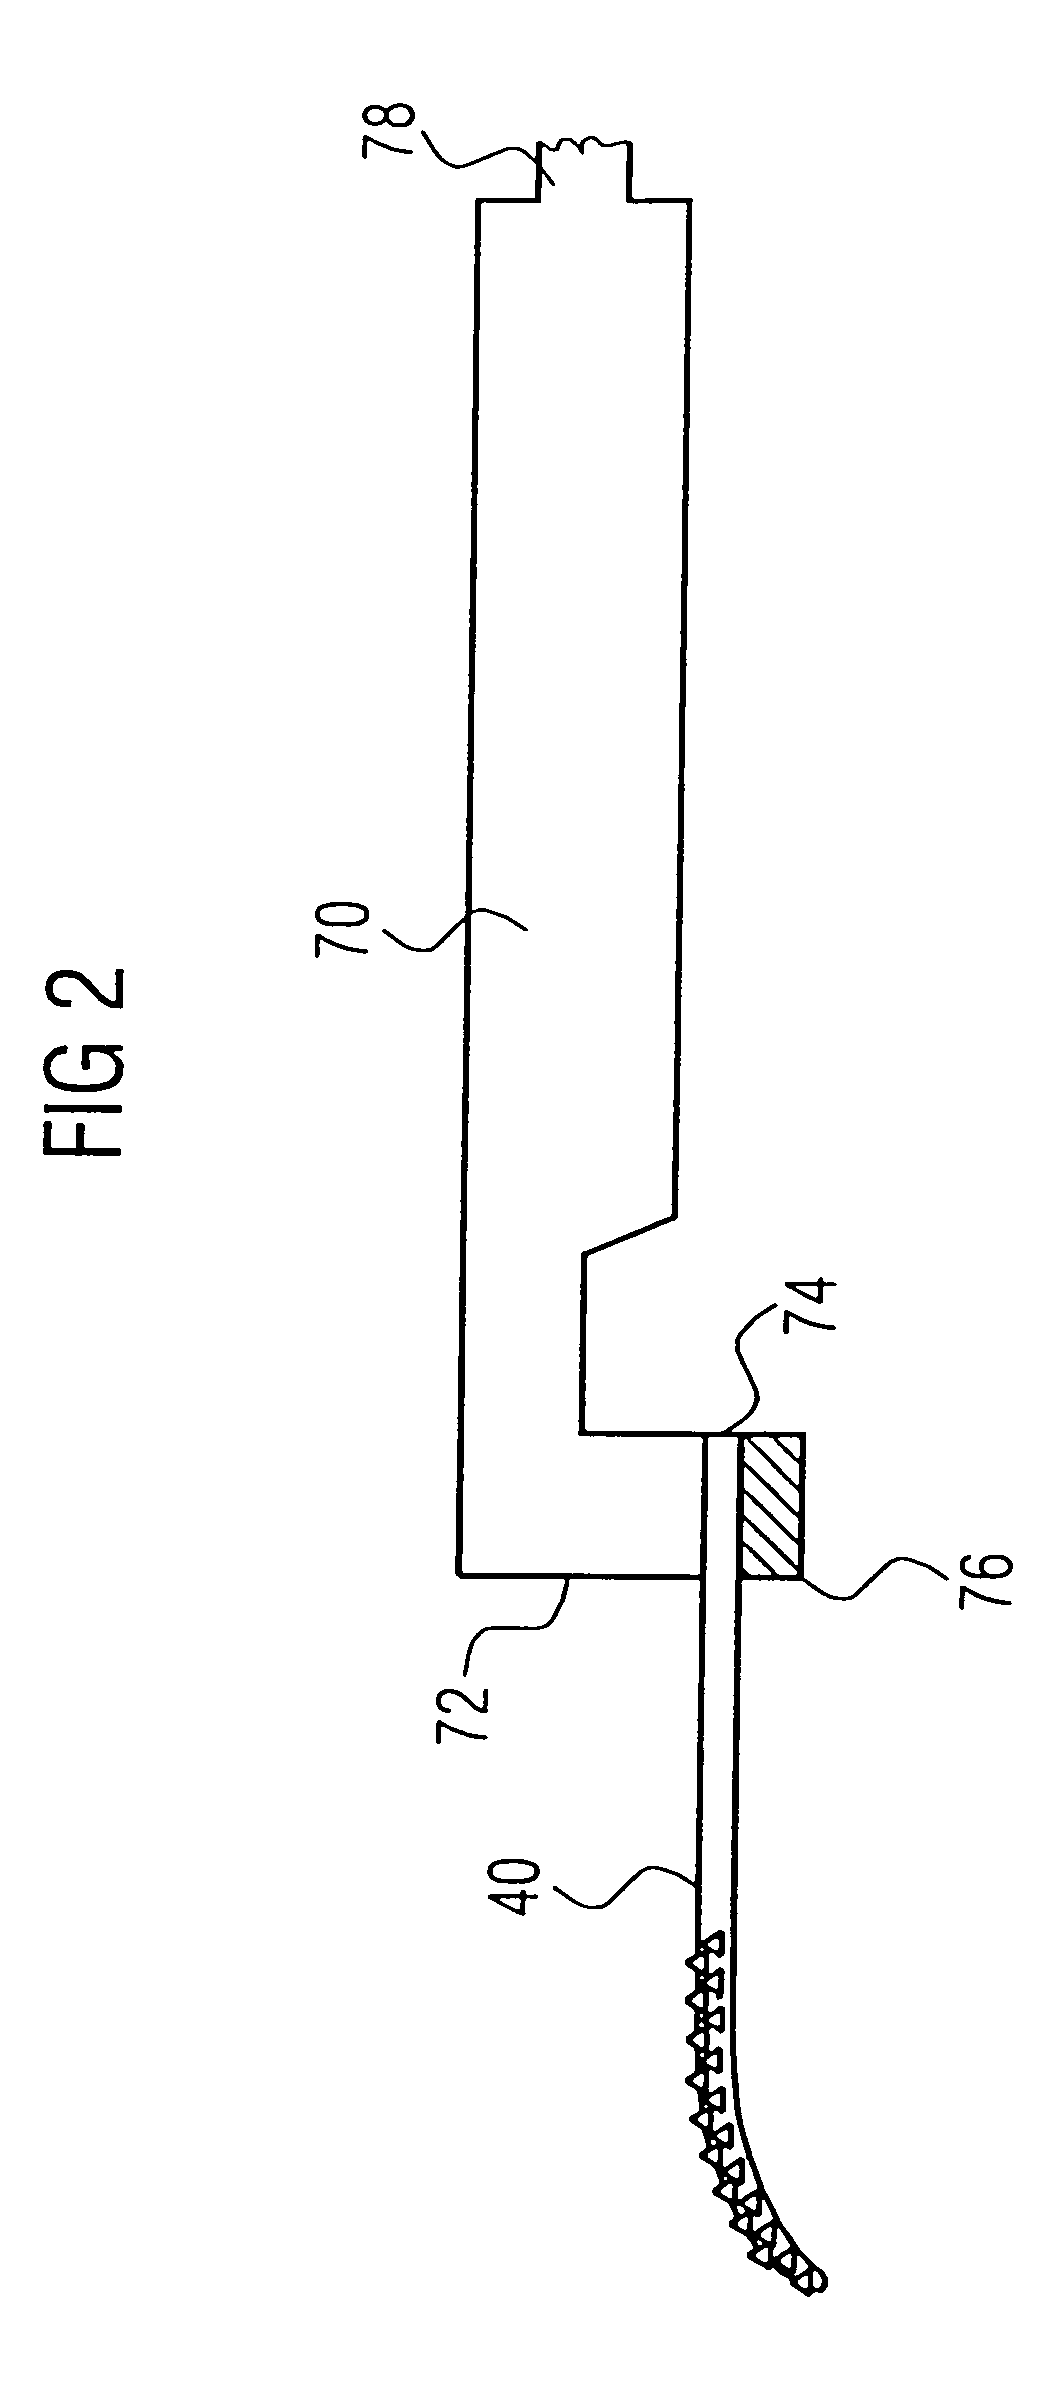 Rasp attachment for a motor-driven surgical hand-held device